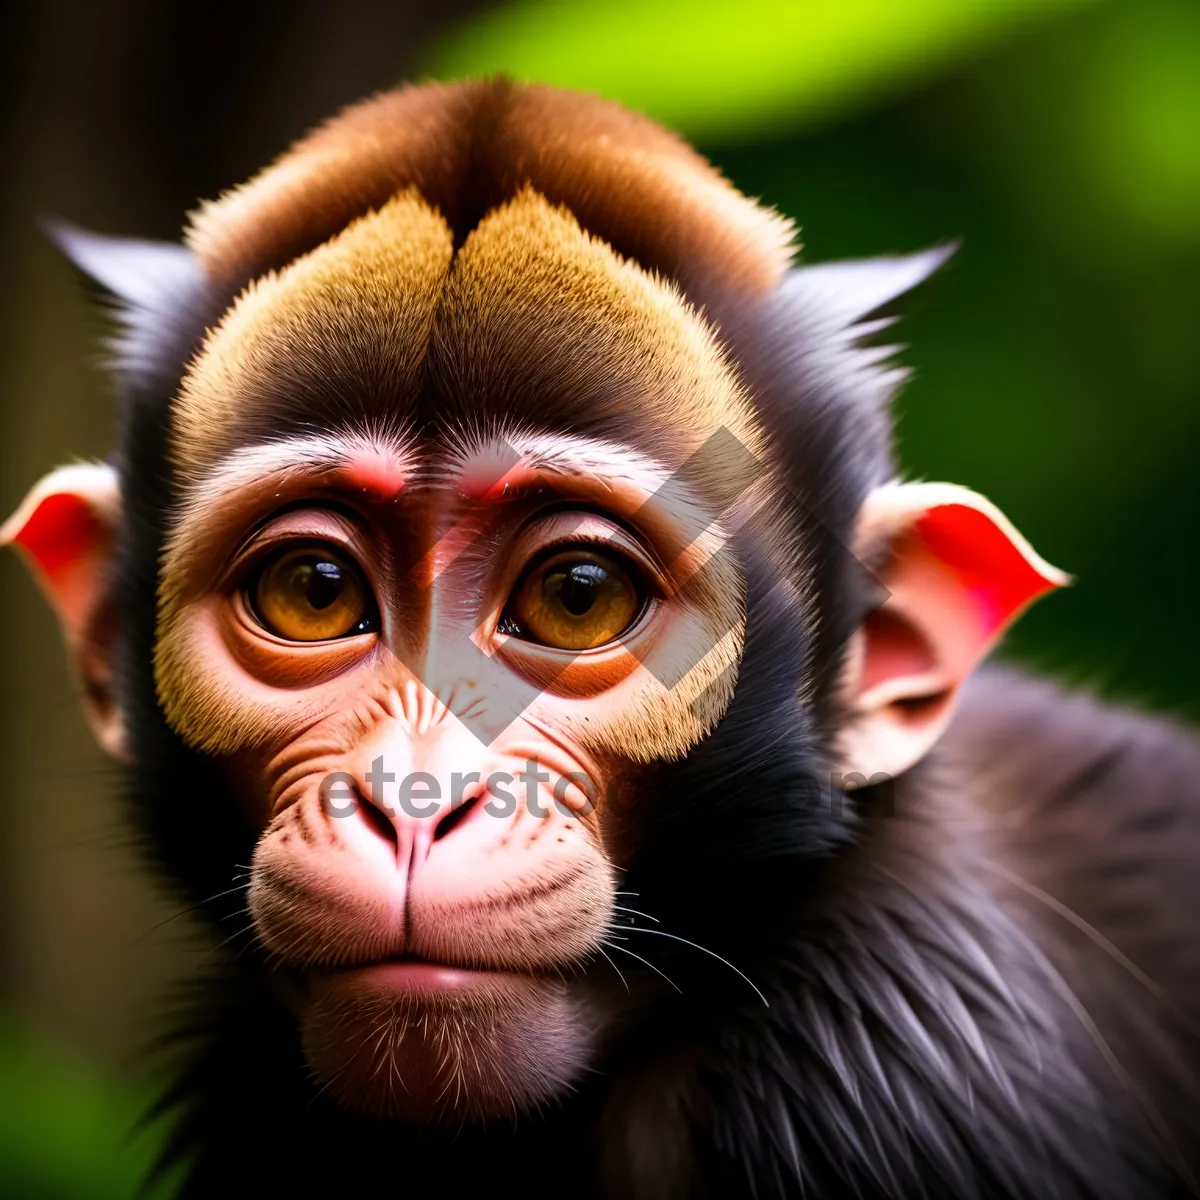 Picture of Cute Baby Monkey with Expressive Eyes